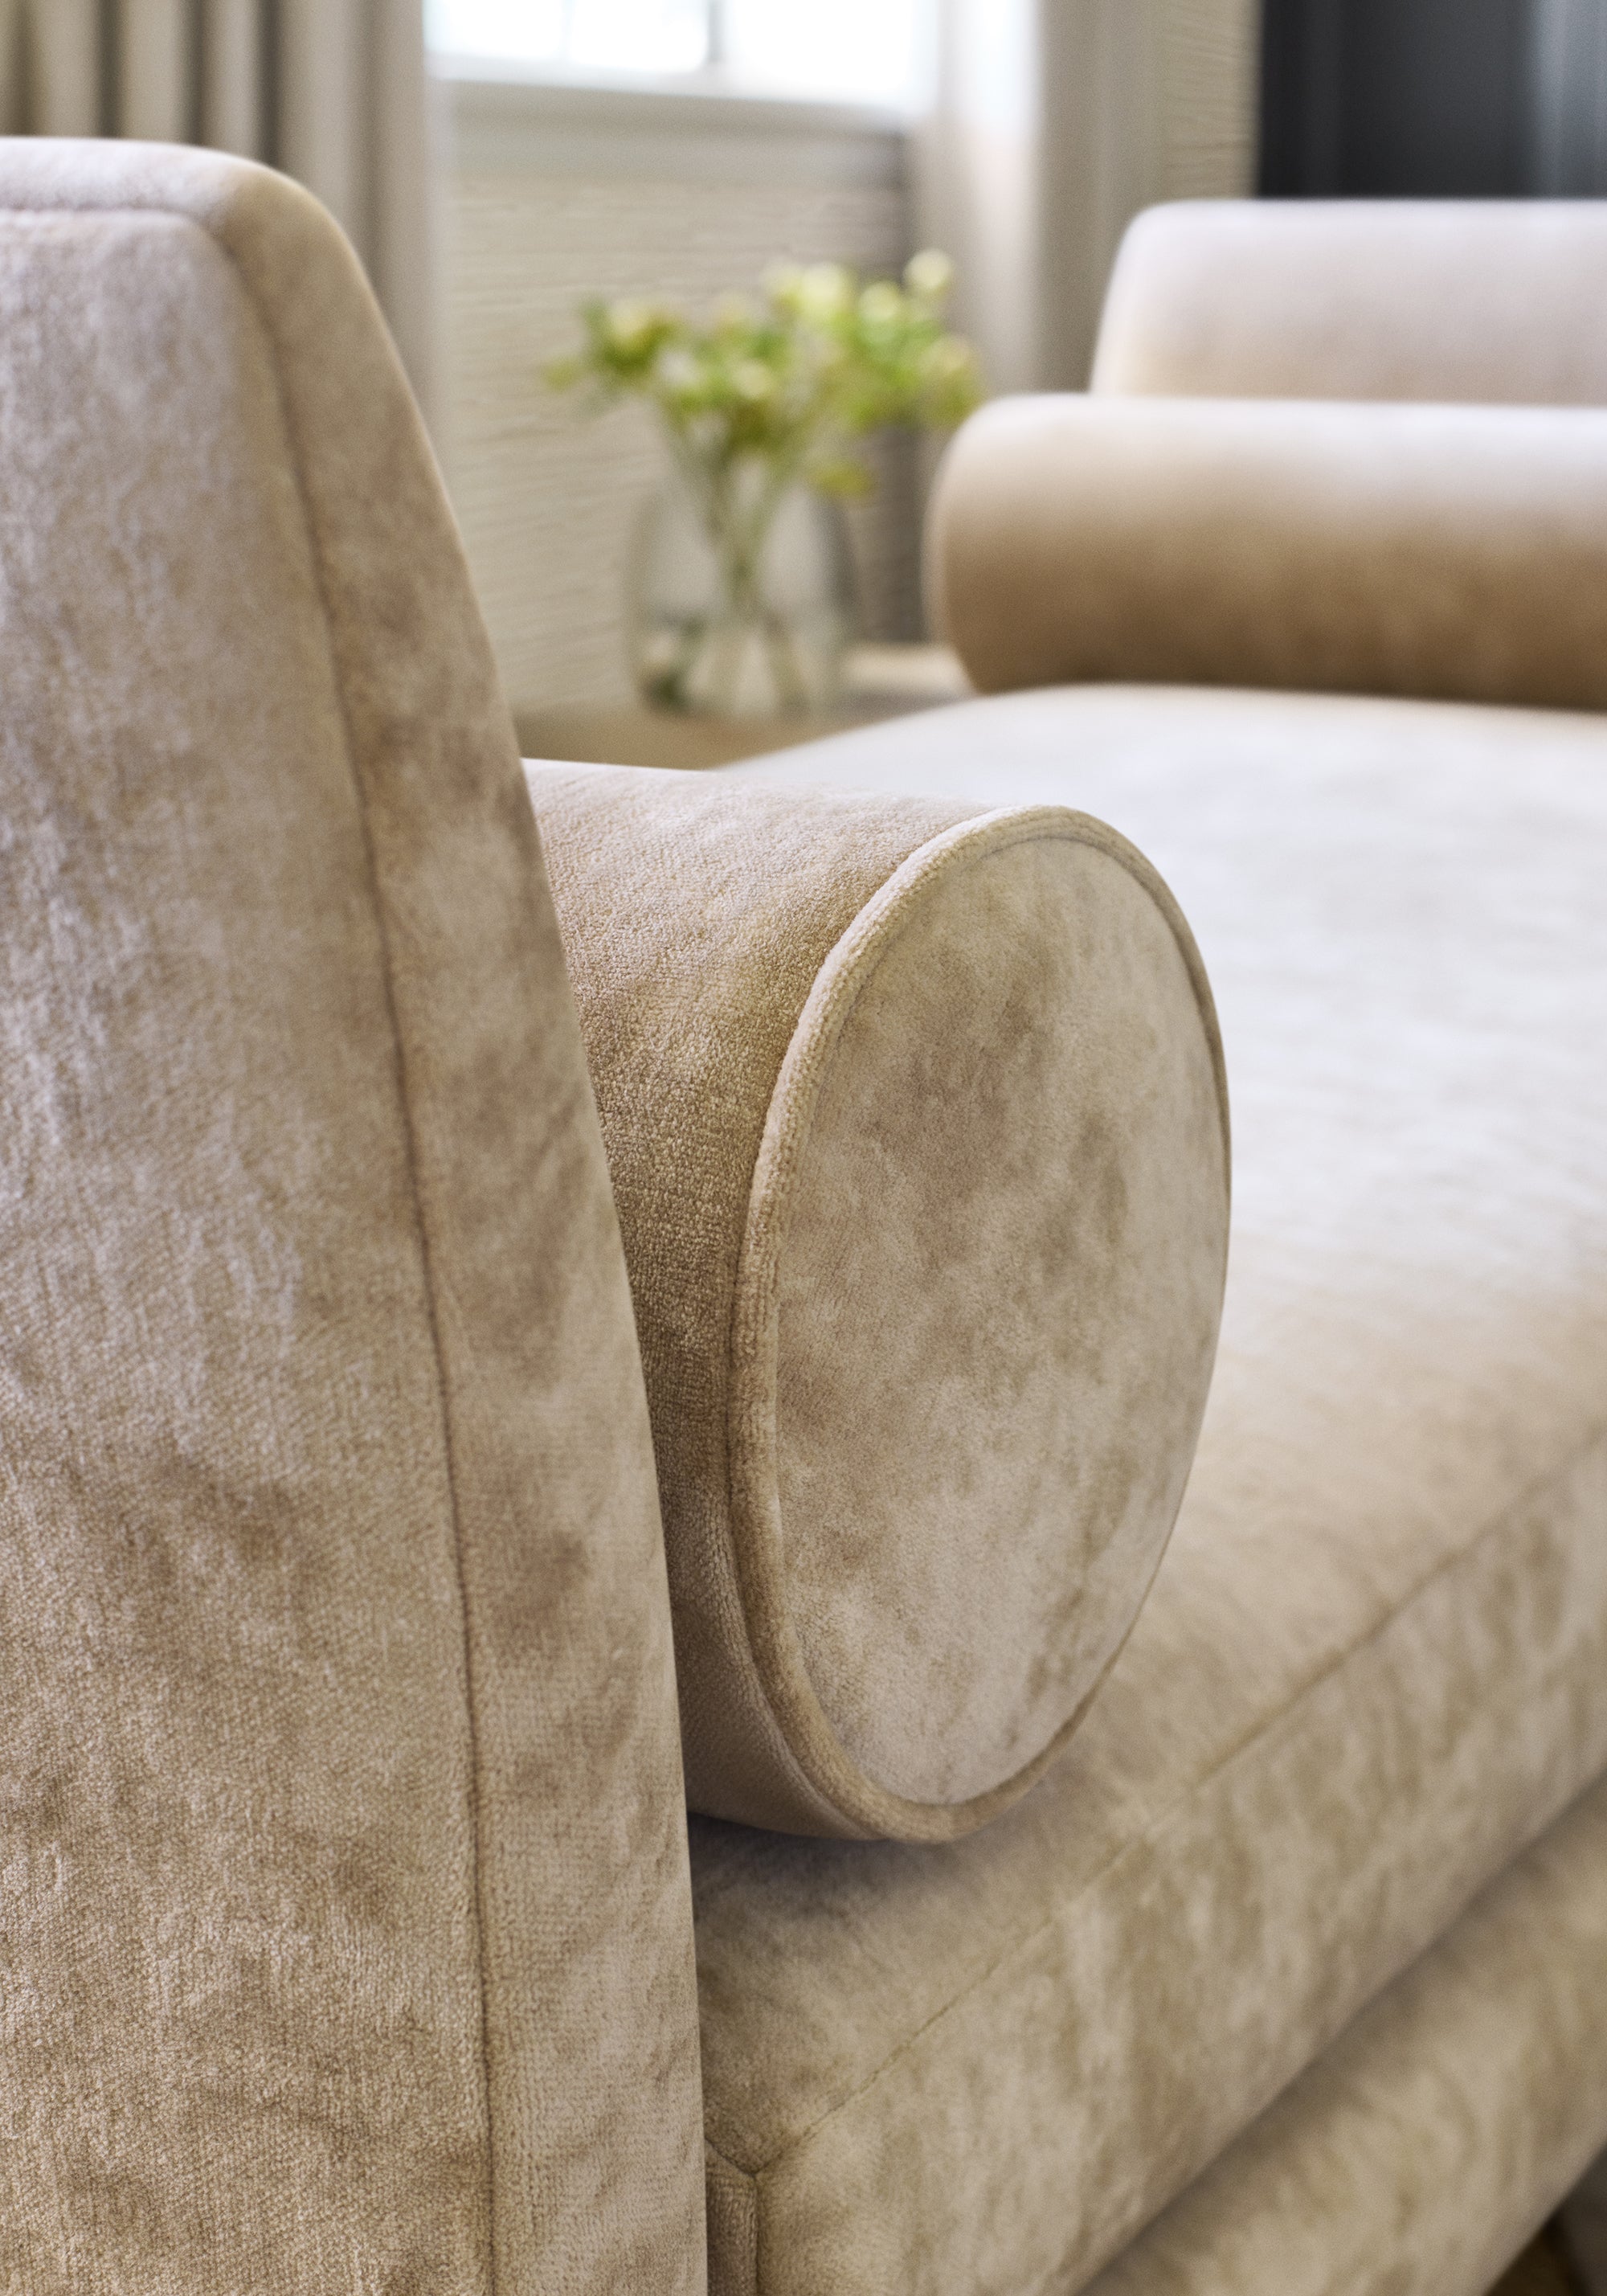 Up close daybed in Celeste Velvet fabric in sand color - pattern number W8967 - by Thibaut in the Lyra Velvets collection